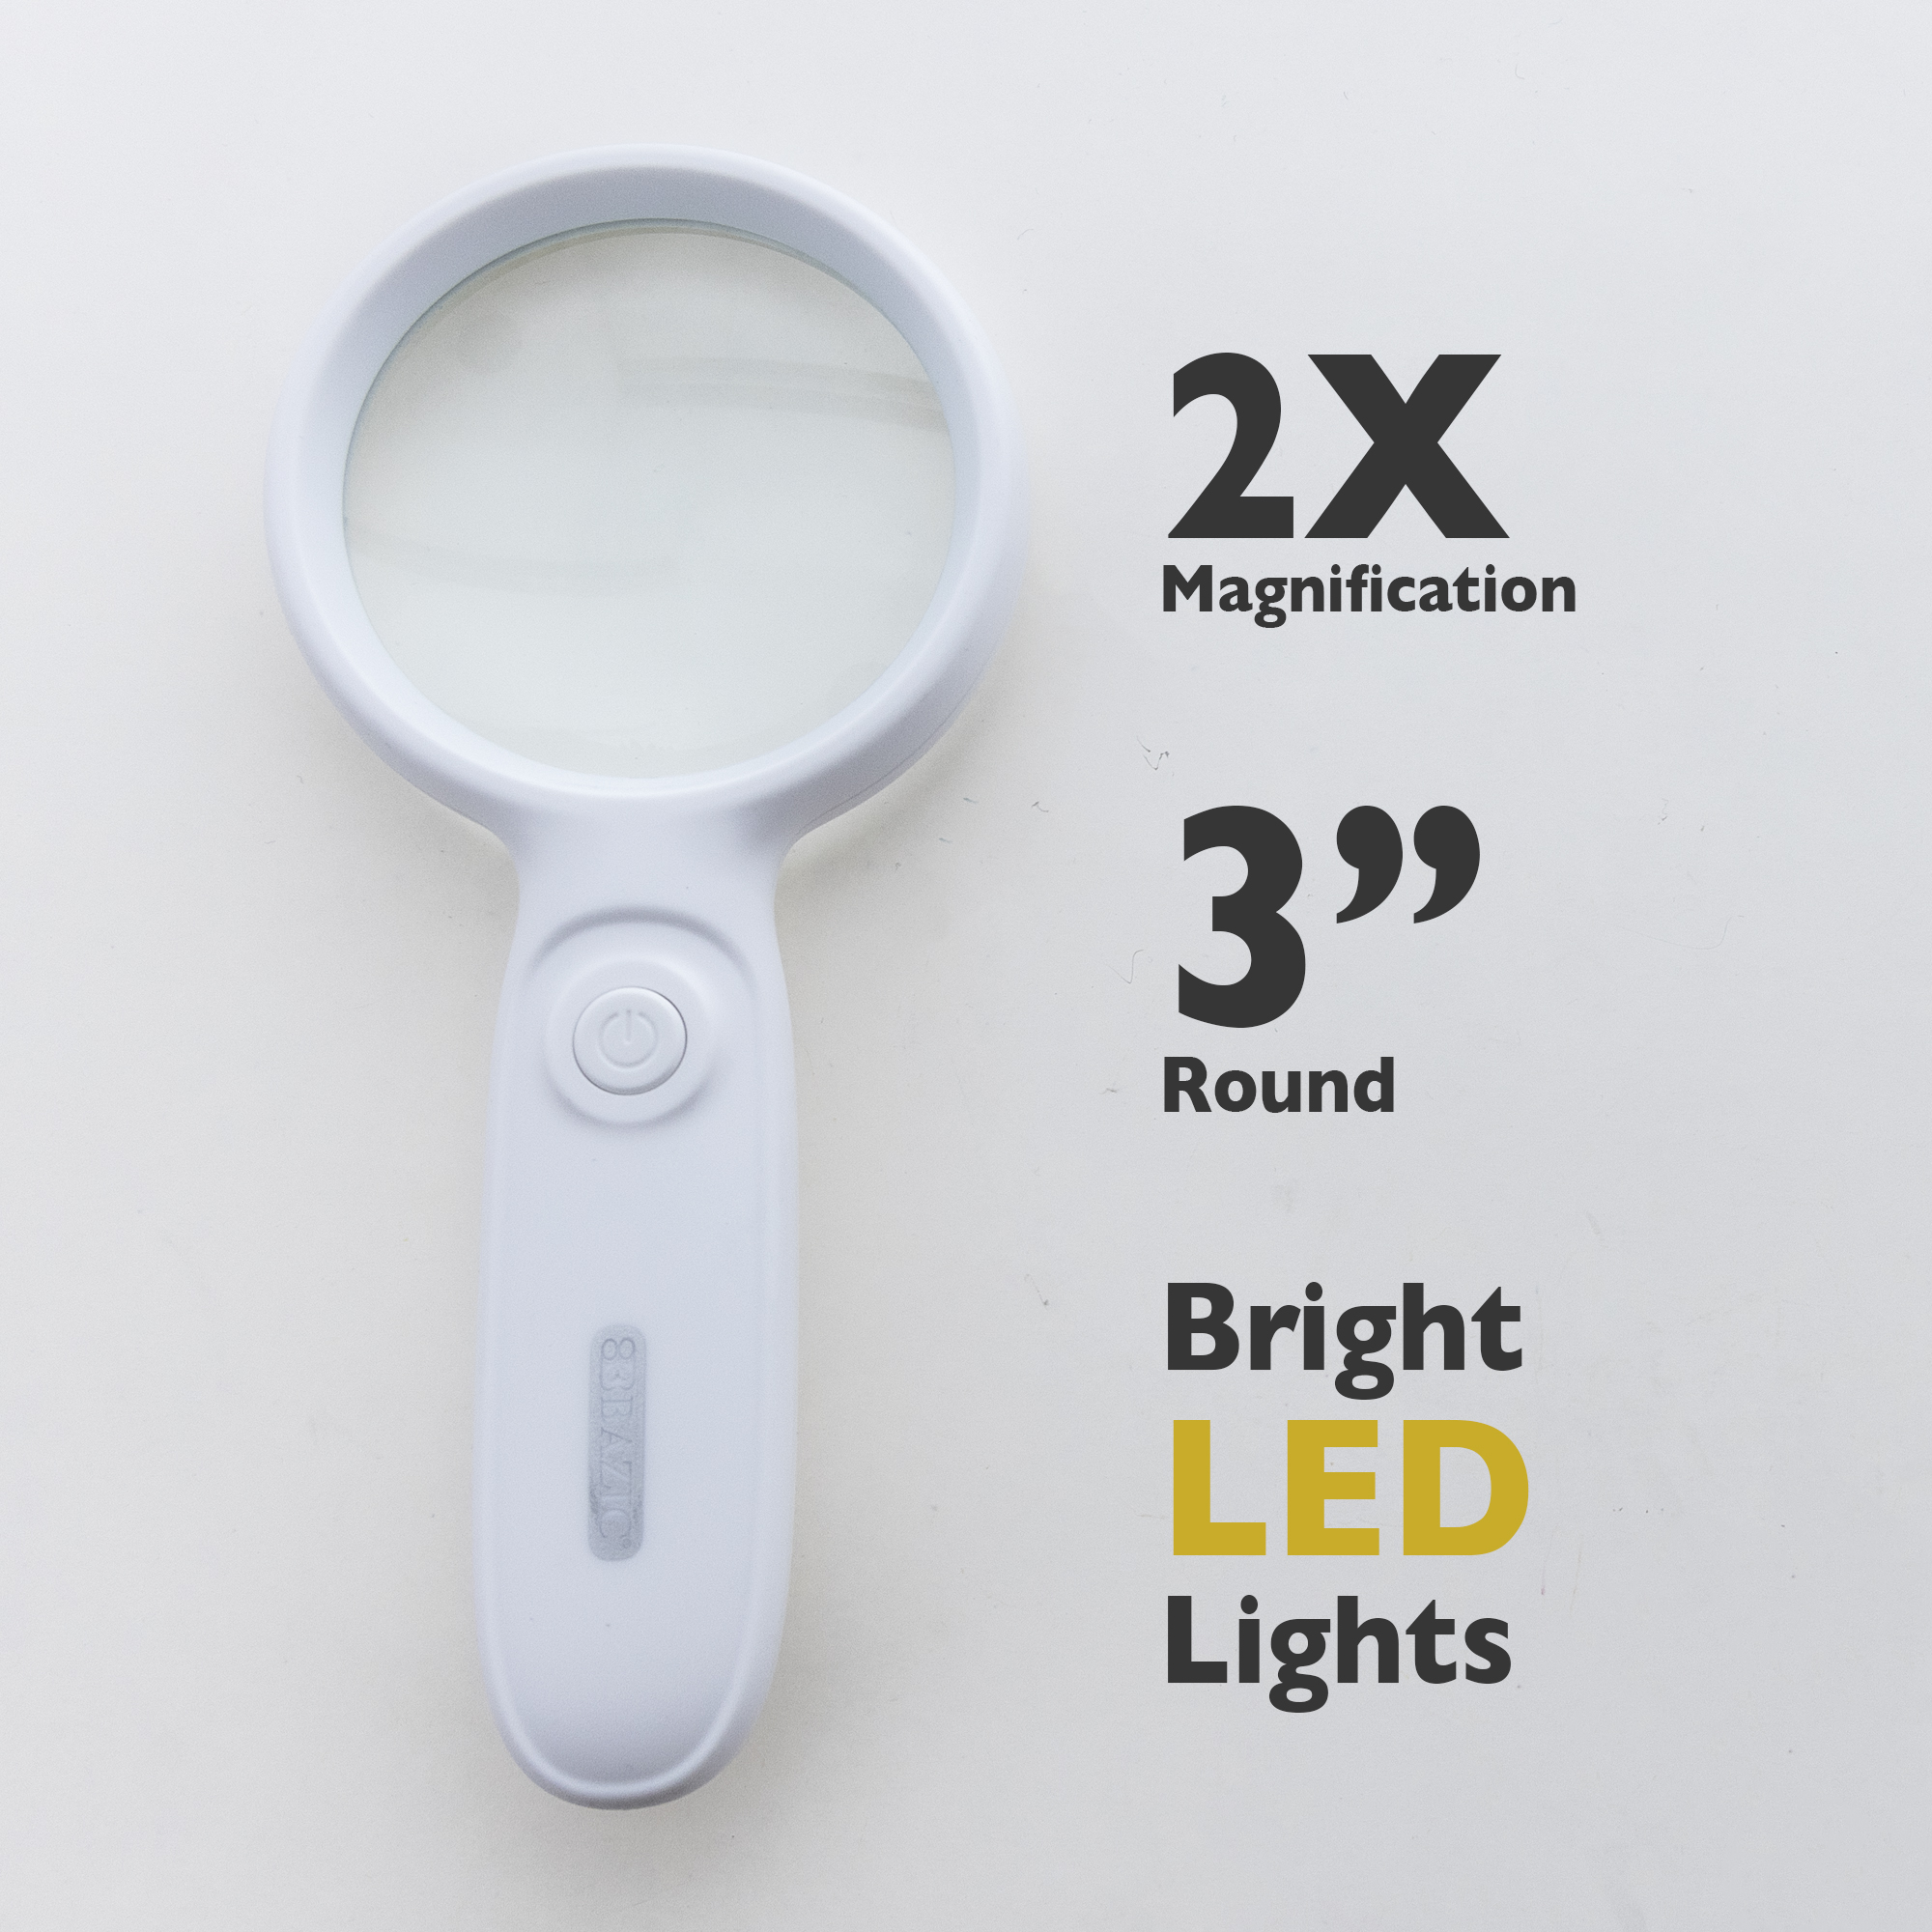 Delixike 200% Magnifying Glasses with Light,Led Lighted